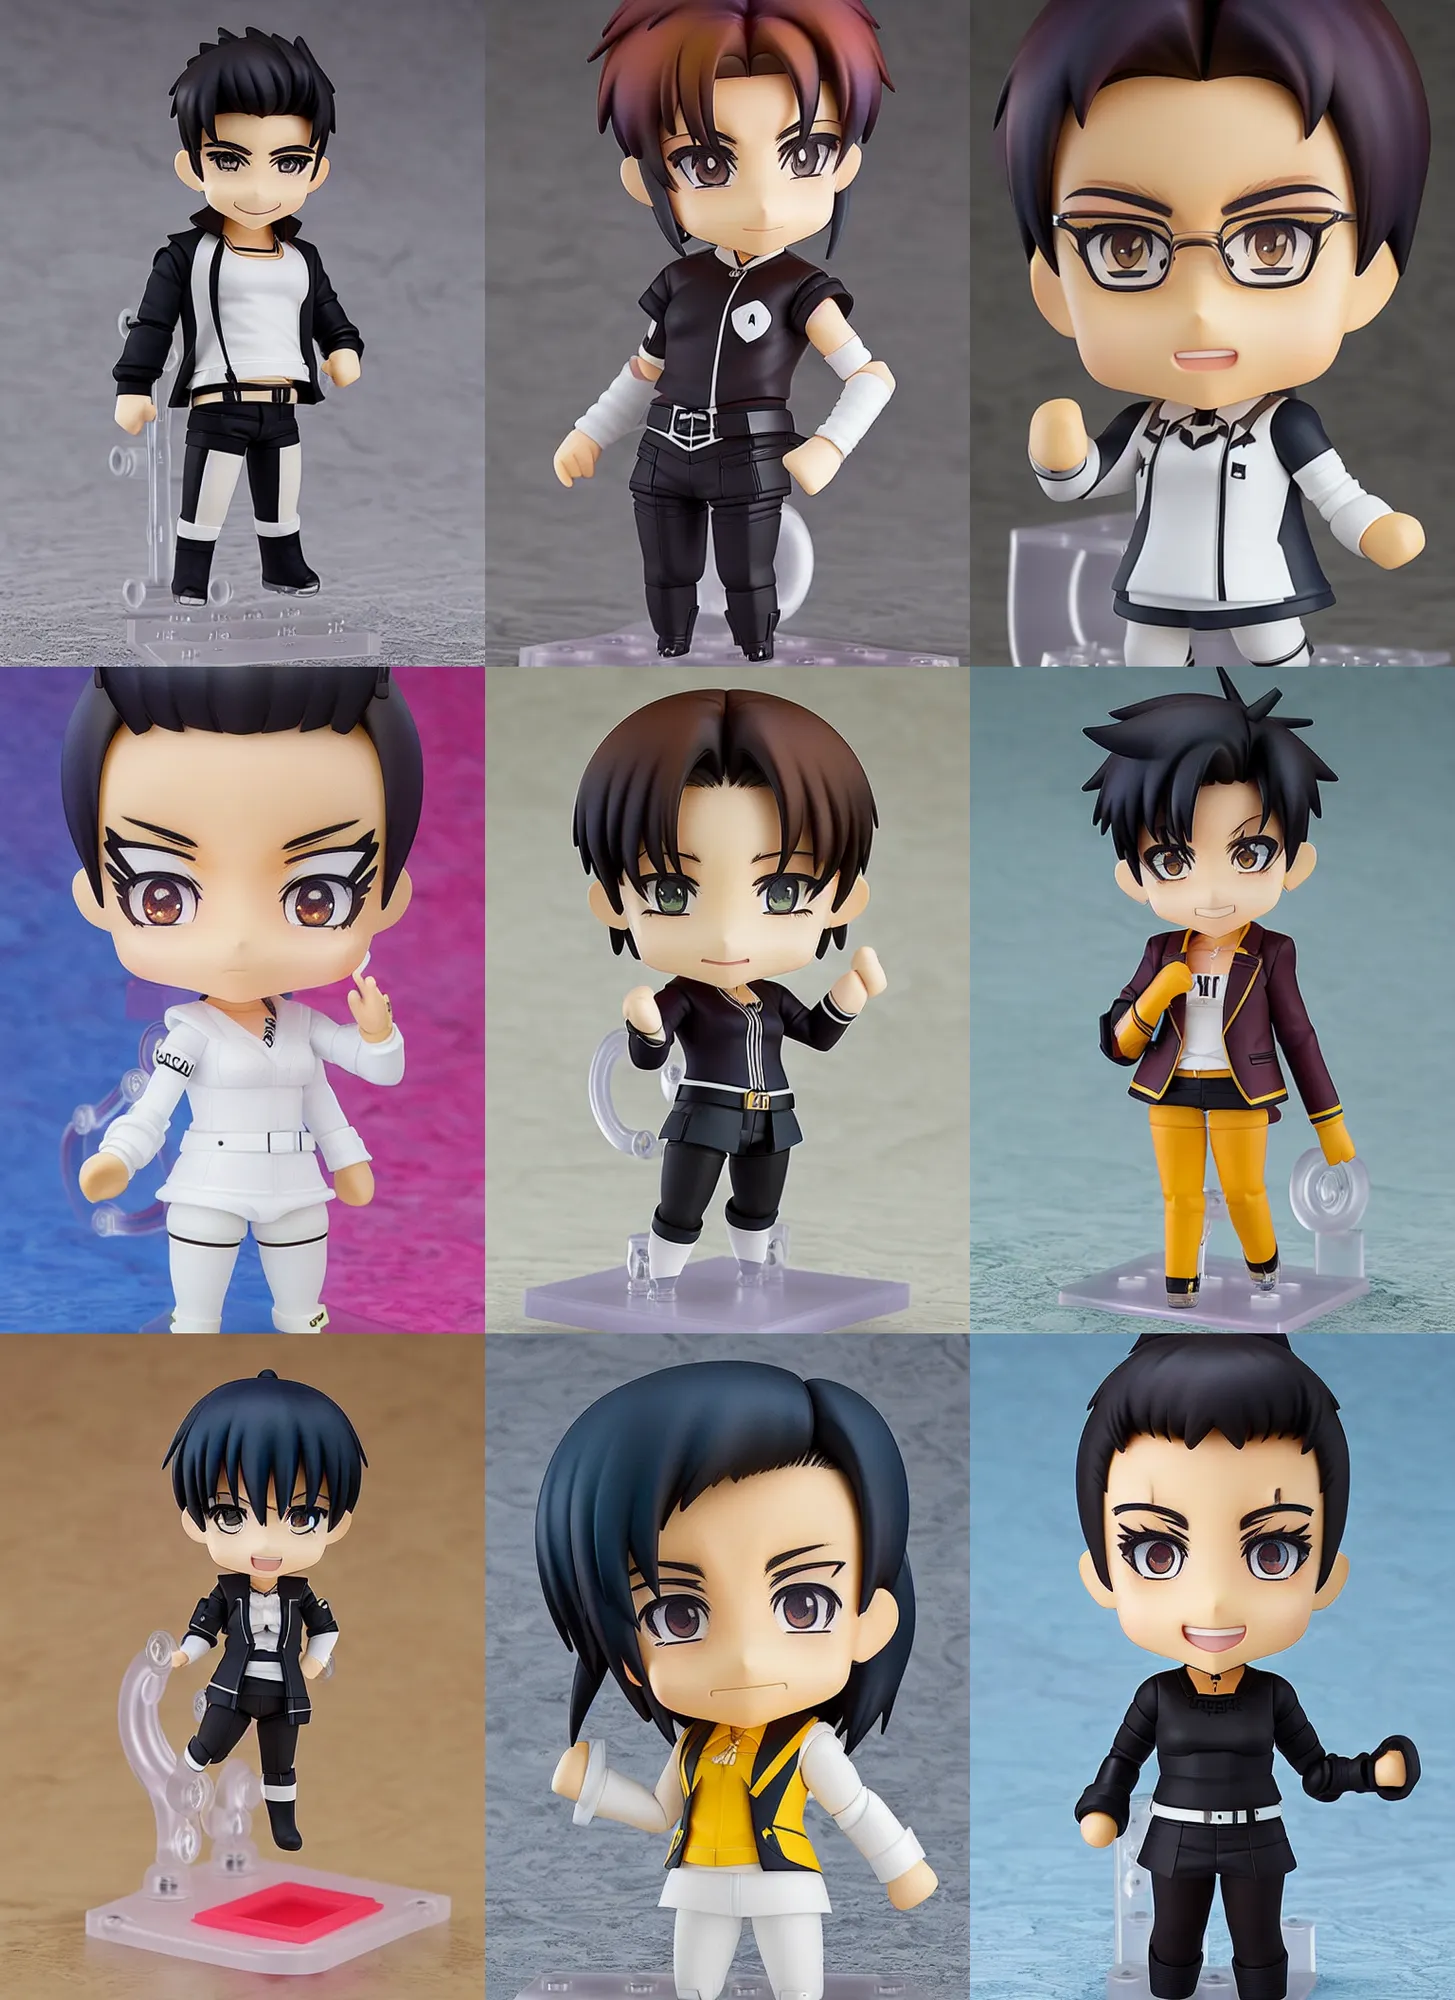 Prompt: an anime nendoroid of james charles, detailed product photo